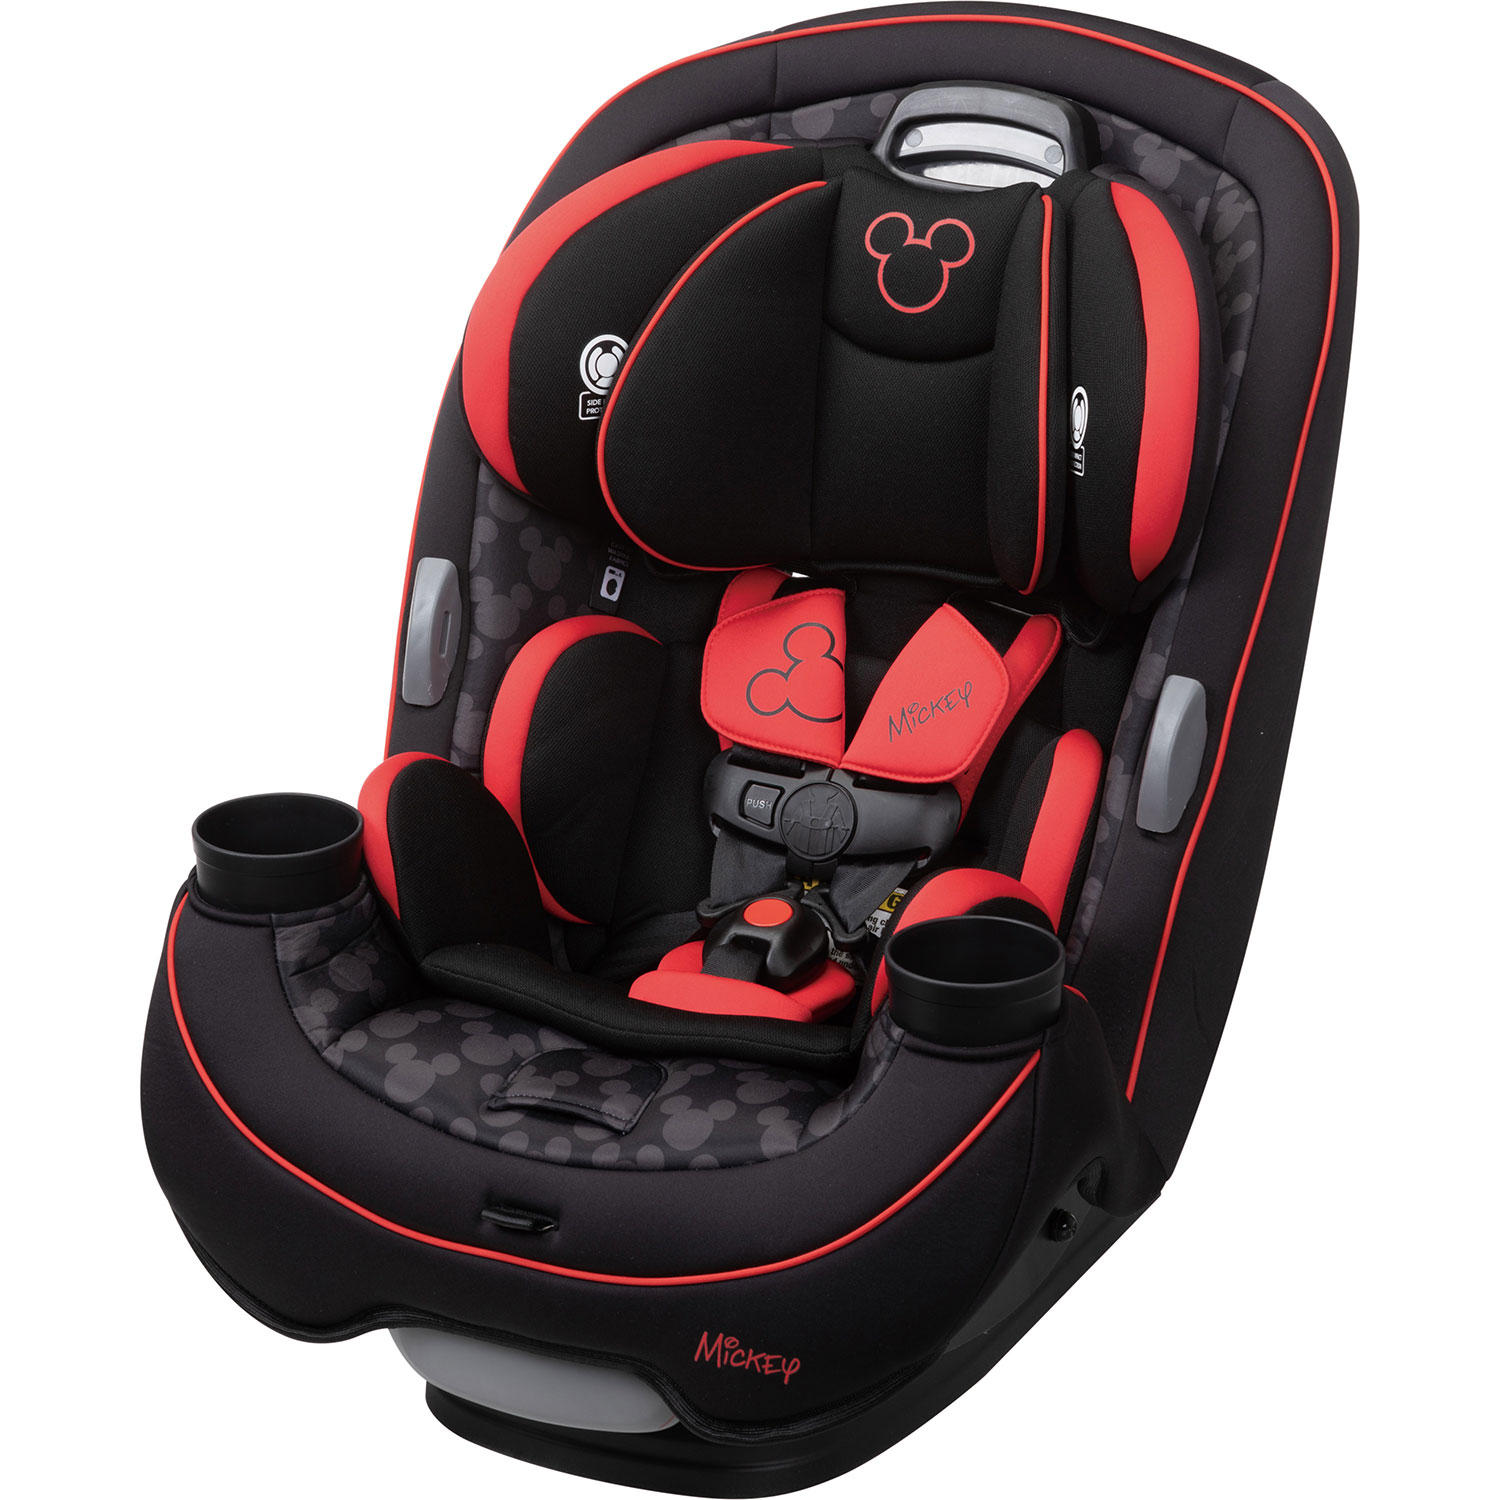 Disney Baby Grow and Go All in One Convertible Car Seat, Simply Mickey